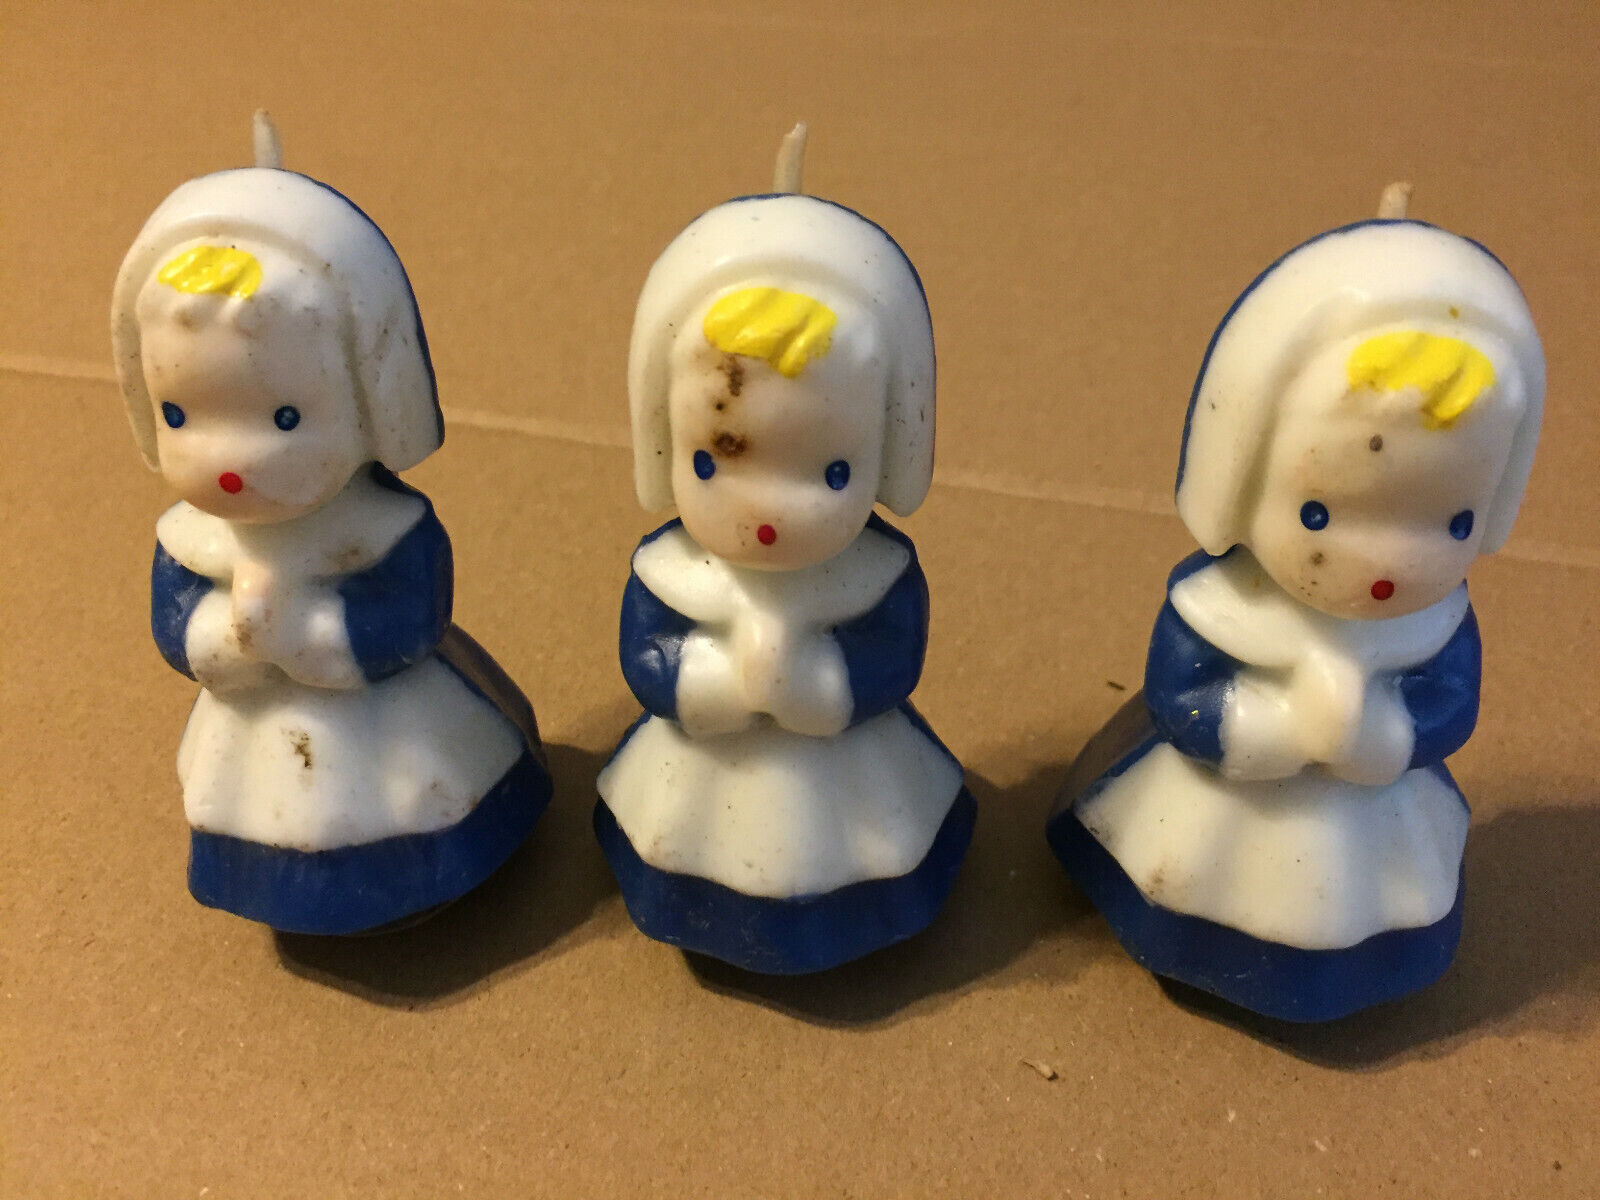 VINTAGE GURLEY MINI PILGRAMS CANDLES 3" 3CT Gurley's